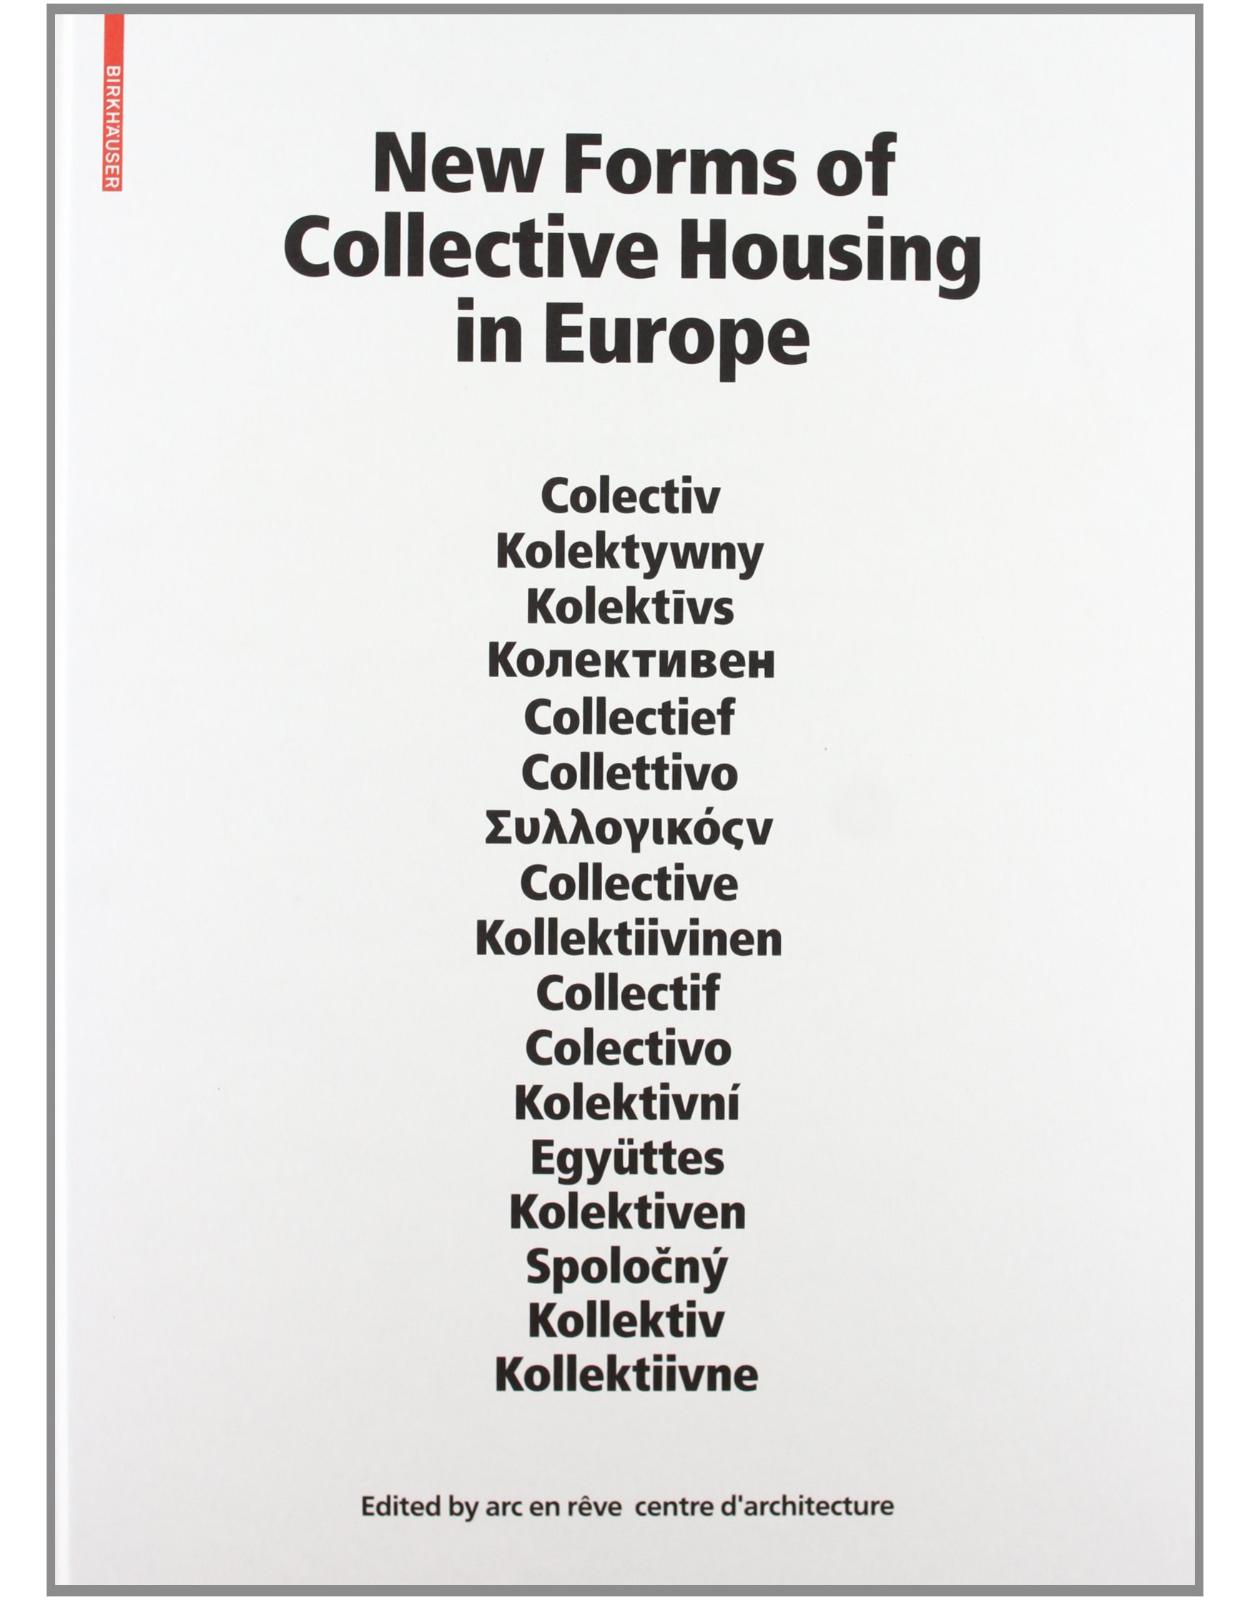 New Forms of Collective Housing in Europe